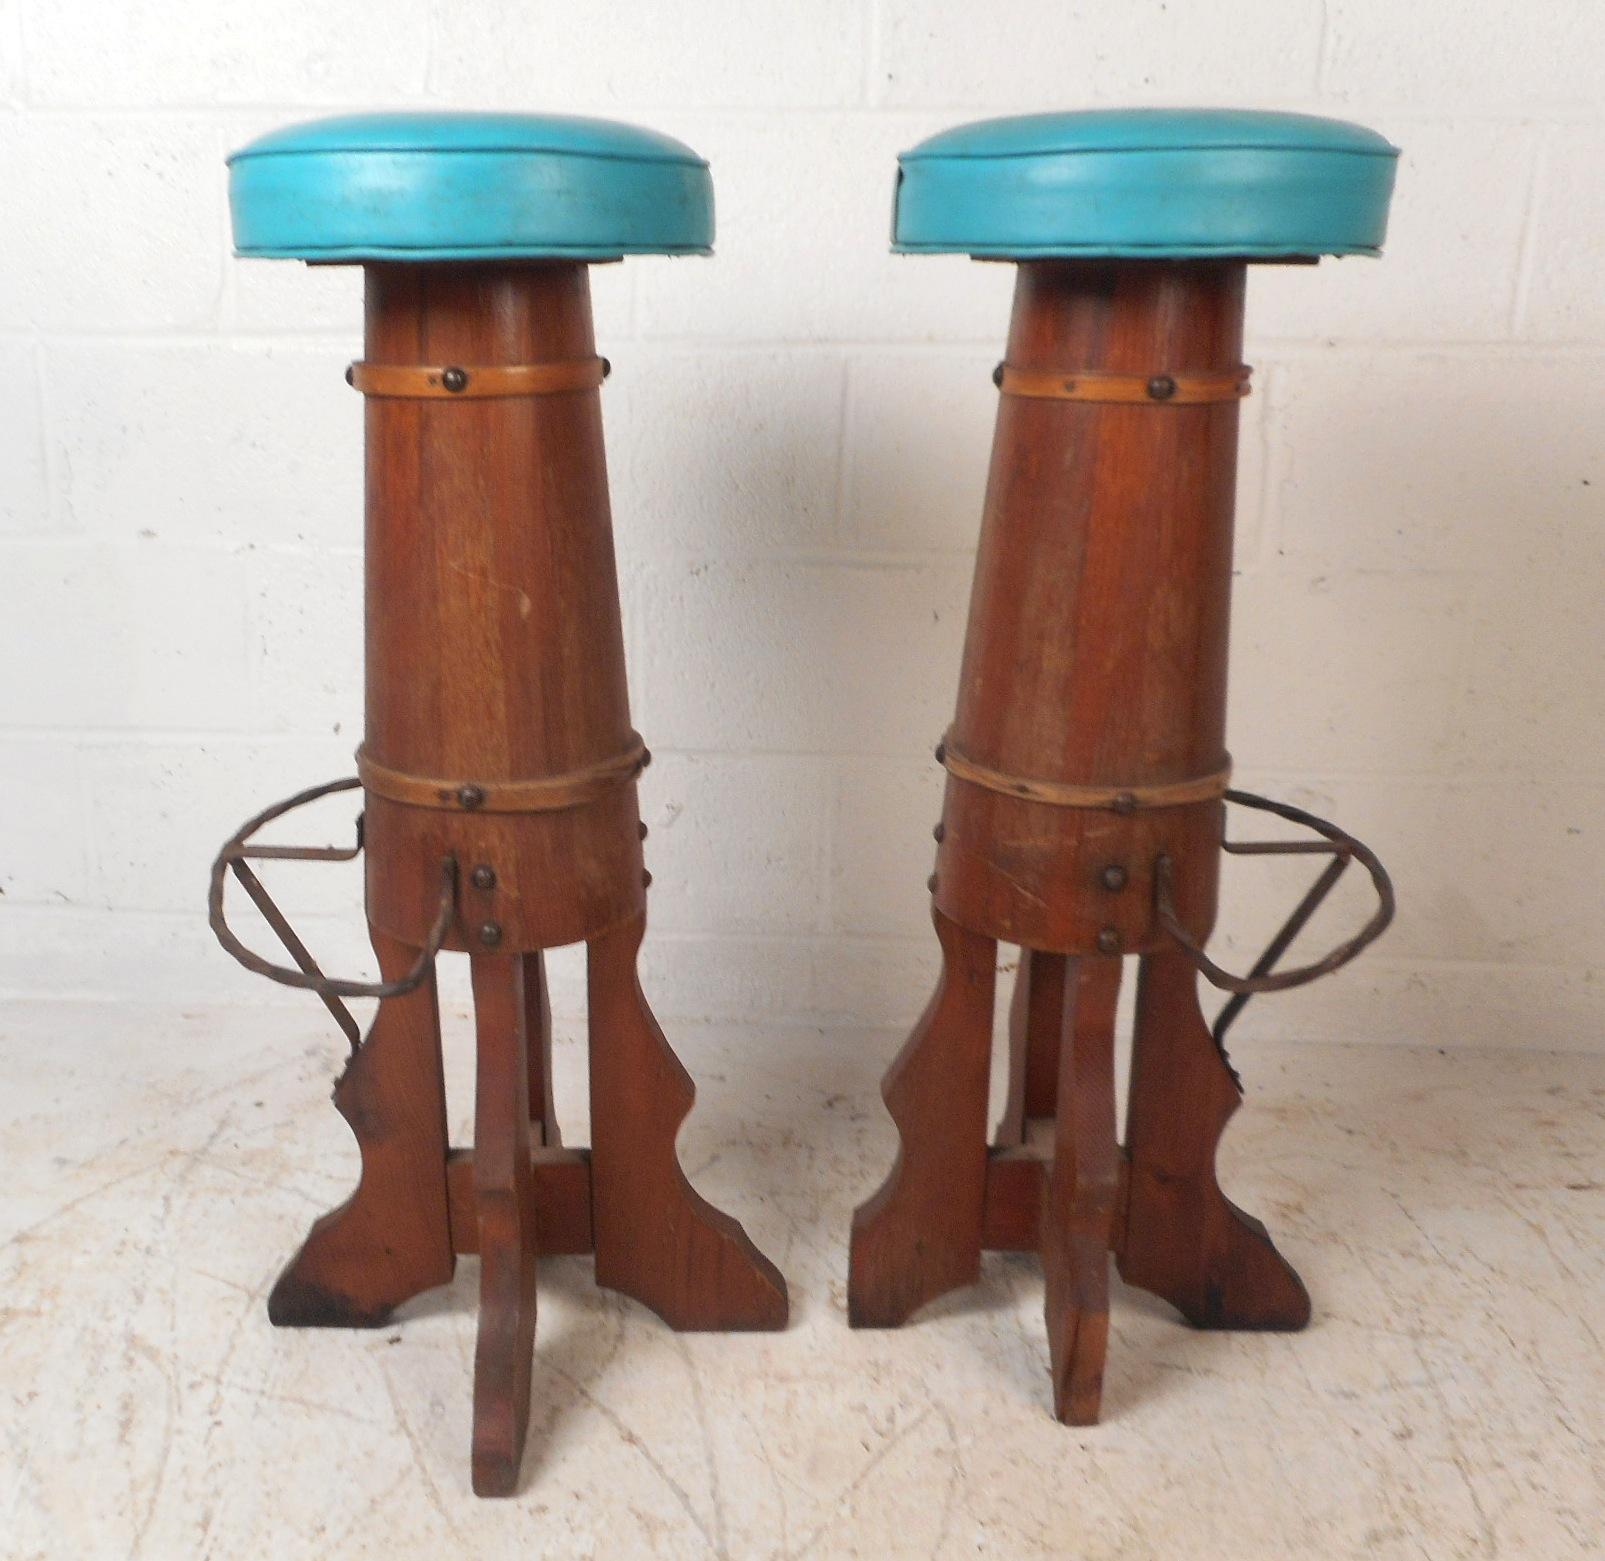 This beautiful pair of vintage modern bar stools feature a barrel style frame with unique spiral iron kick rests. The unusual design has carved feet and a teal blue vinyl covered seat giving off a smooth nautical vibe. This wonderful pair makes the